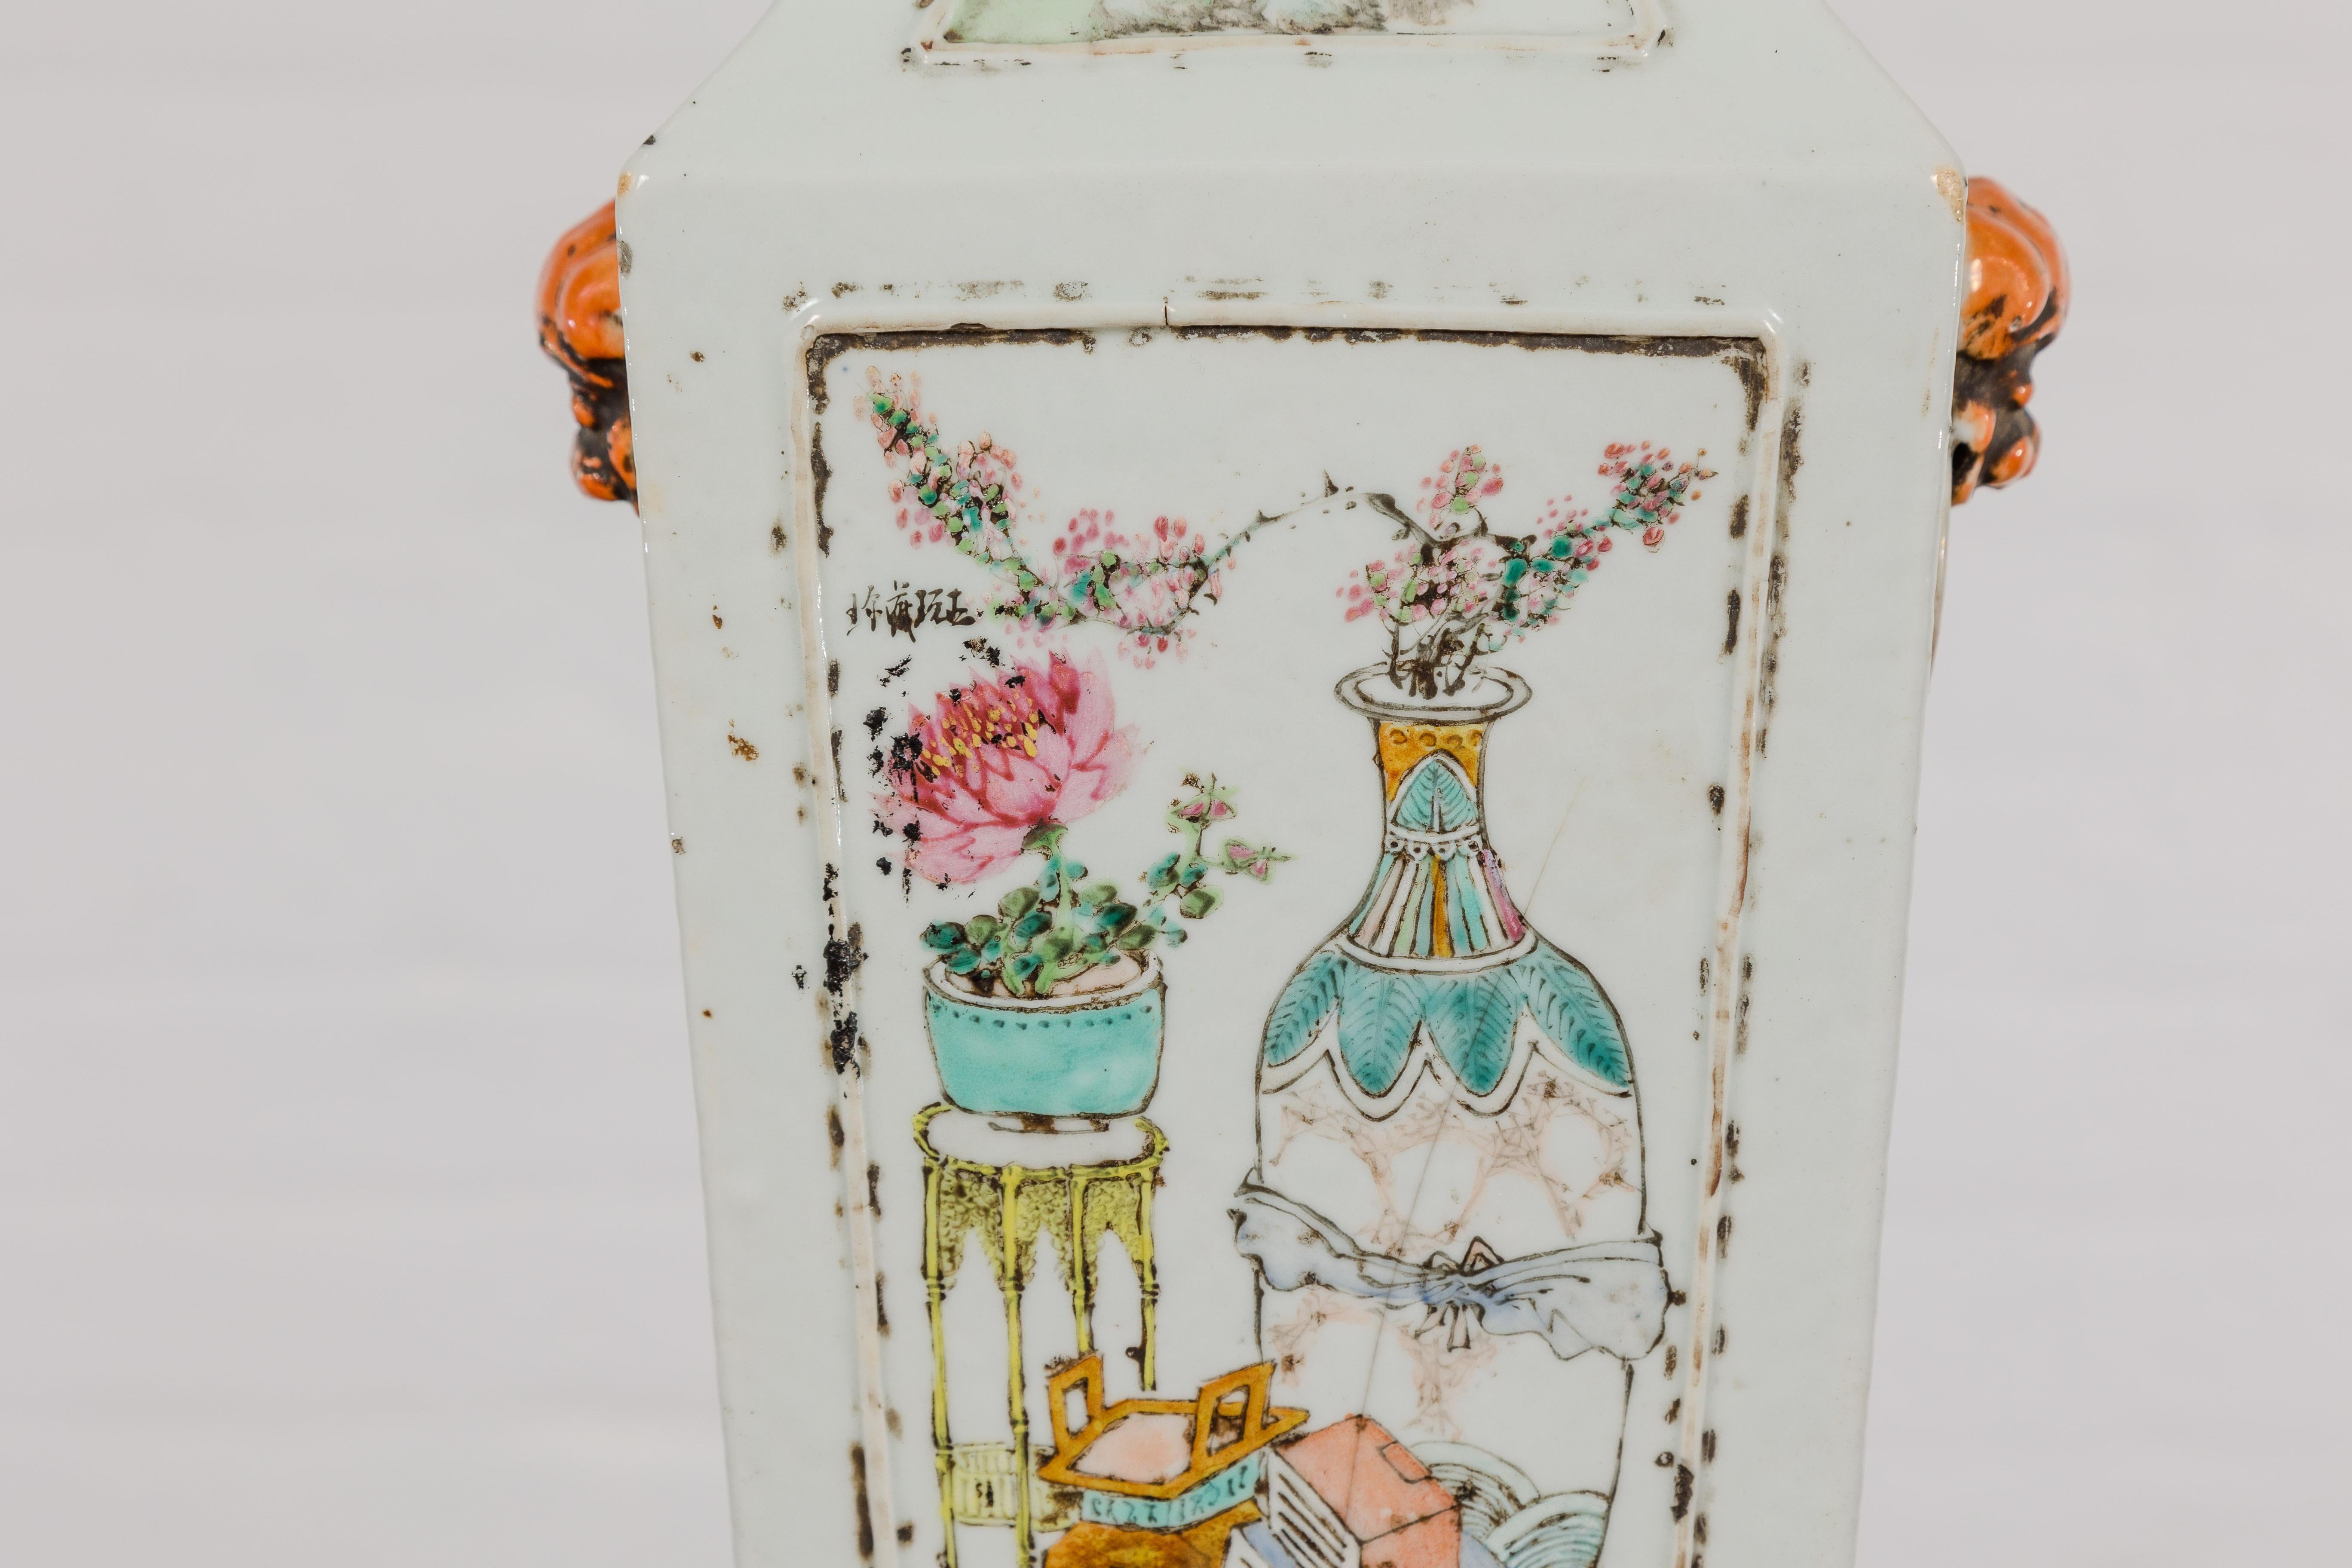 Qing Dynasty White Porcelain Vase with Painted Flowers, Objects and Calligraphy For Sale 1